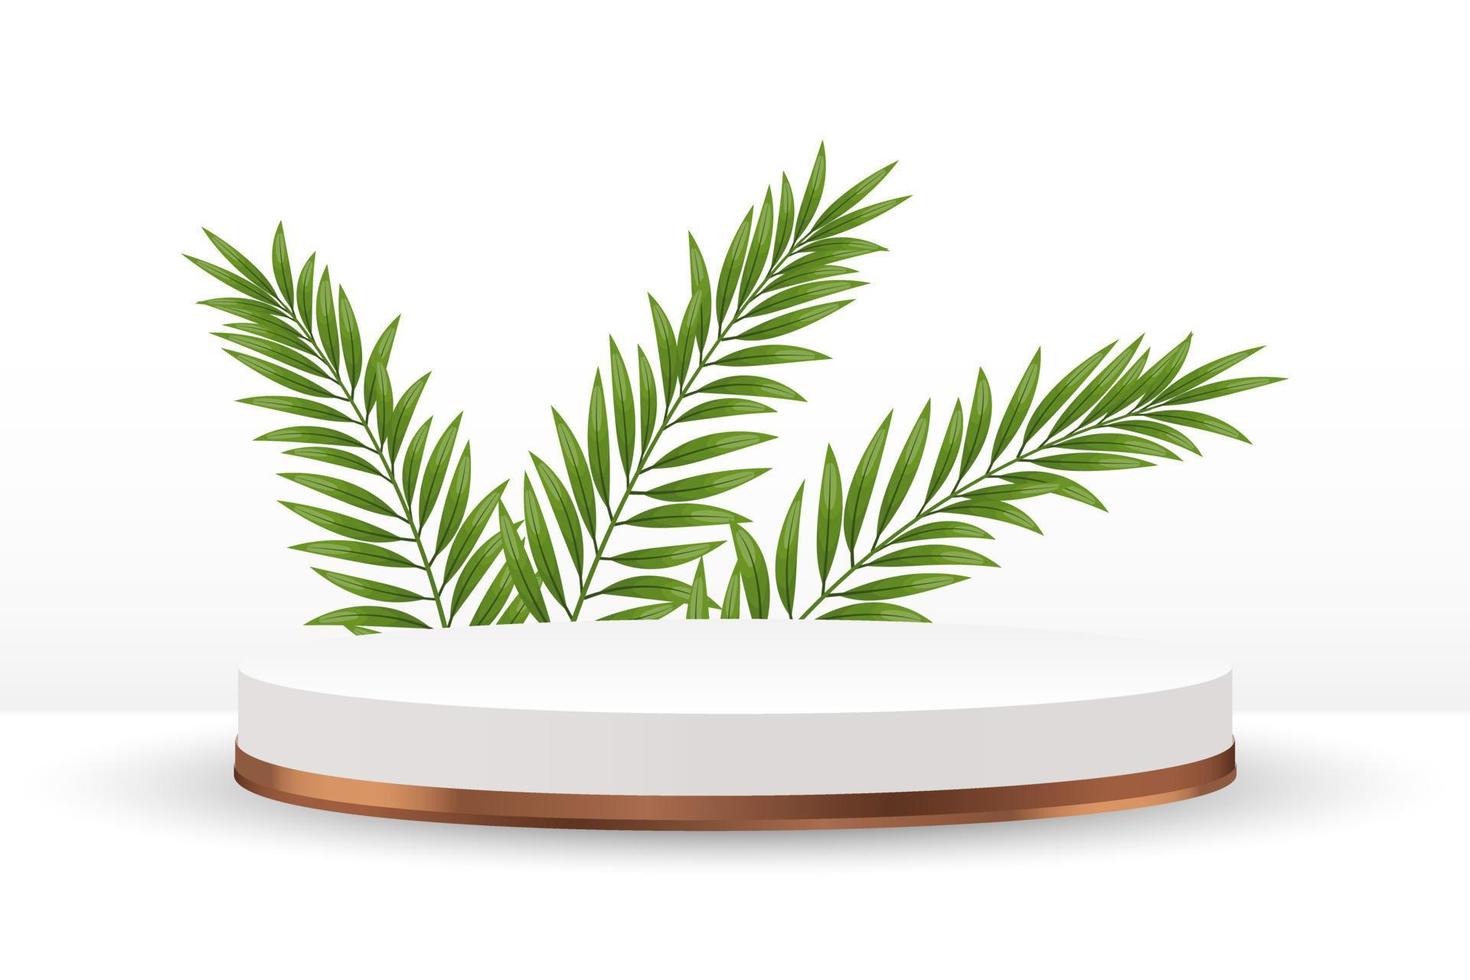 White podium with bronze trim and palm leaves on a white background. 3D illustration, vector